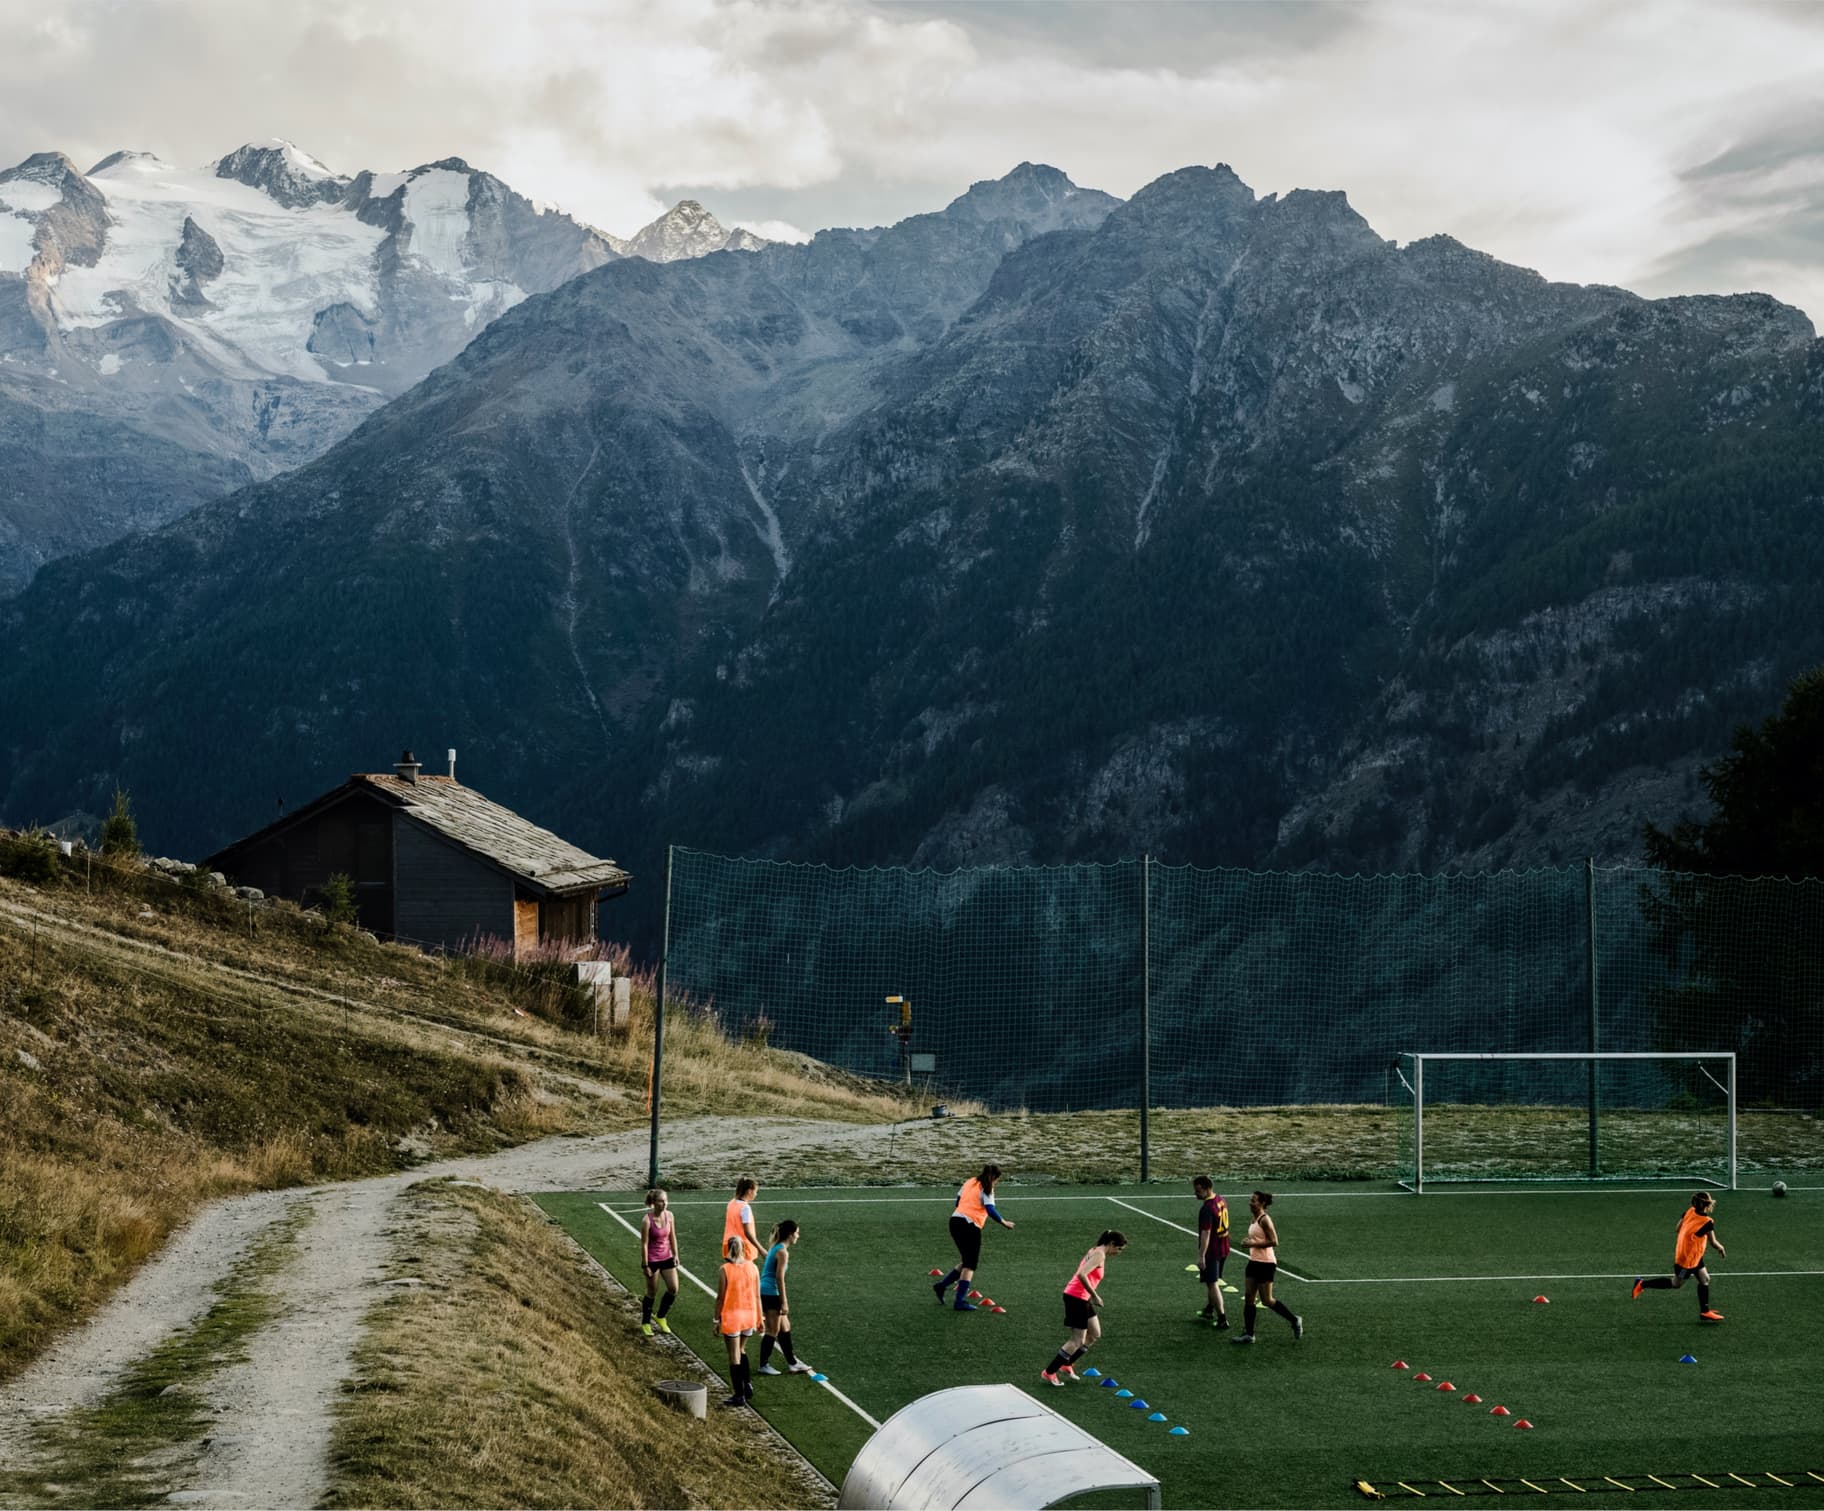 Play Football at the Highest Level in the Swiss Alps . Nike FI